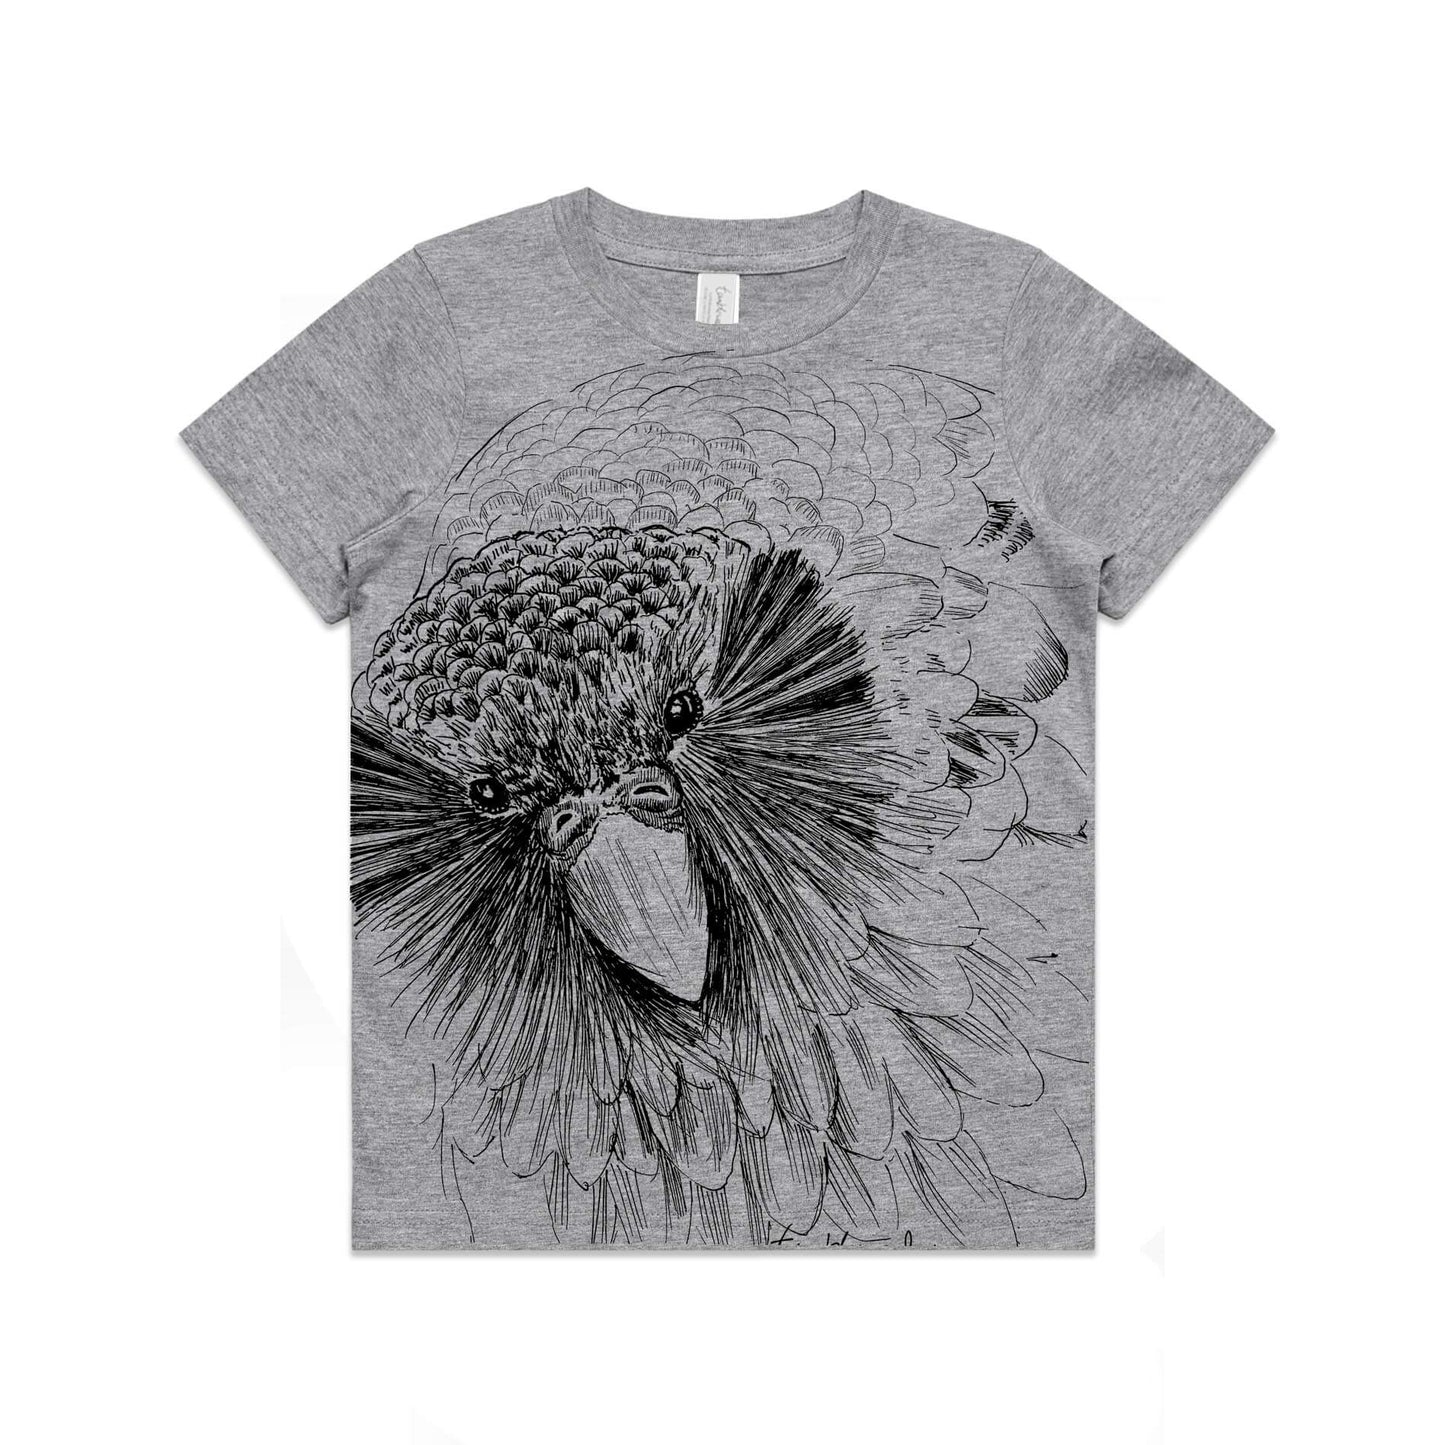 Grey marle, cotton kids' t-shirt with screen printed Sirocco the Kakapo design.